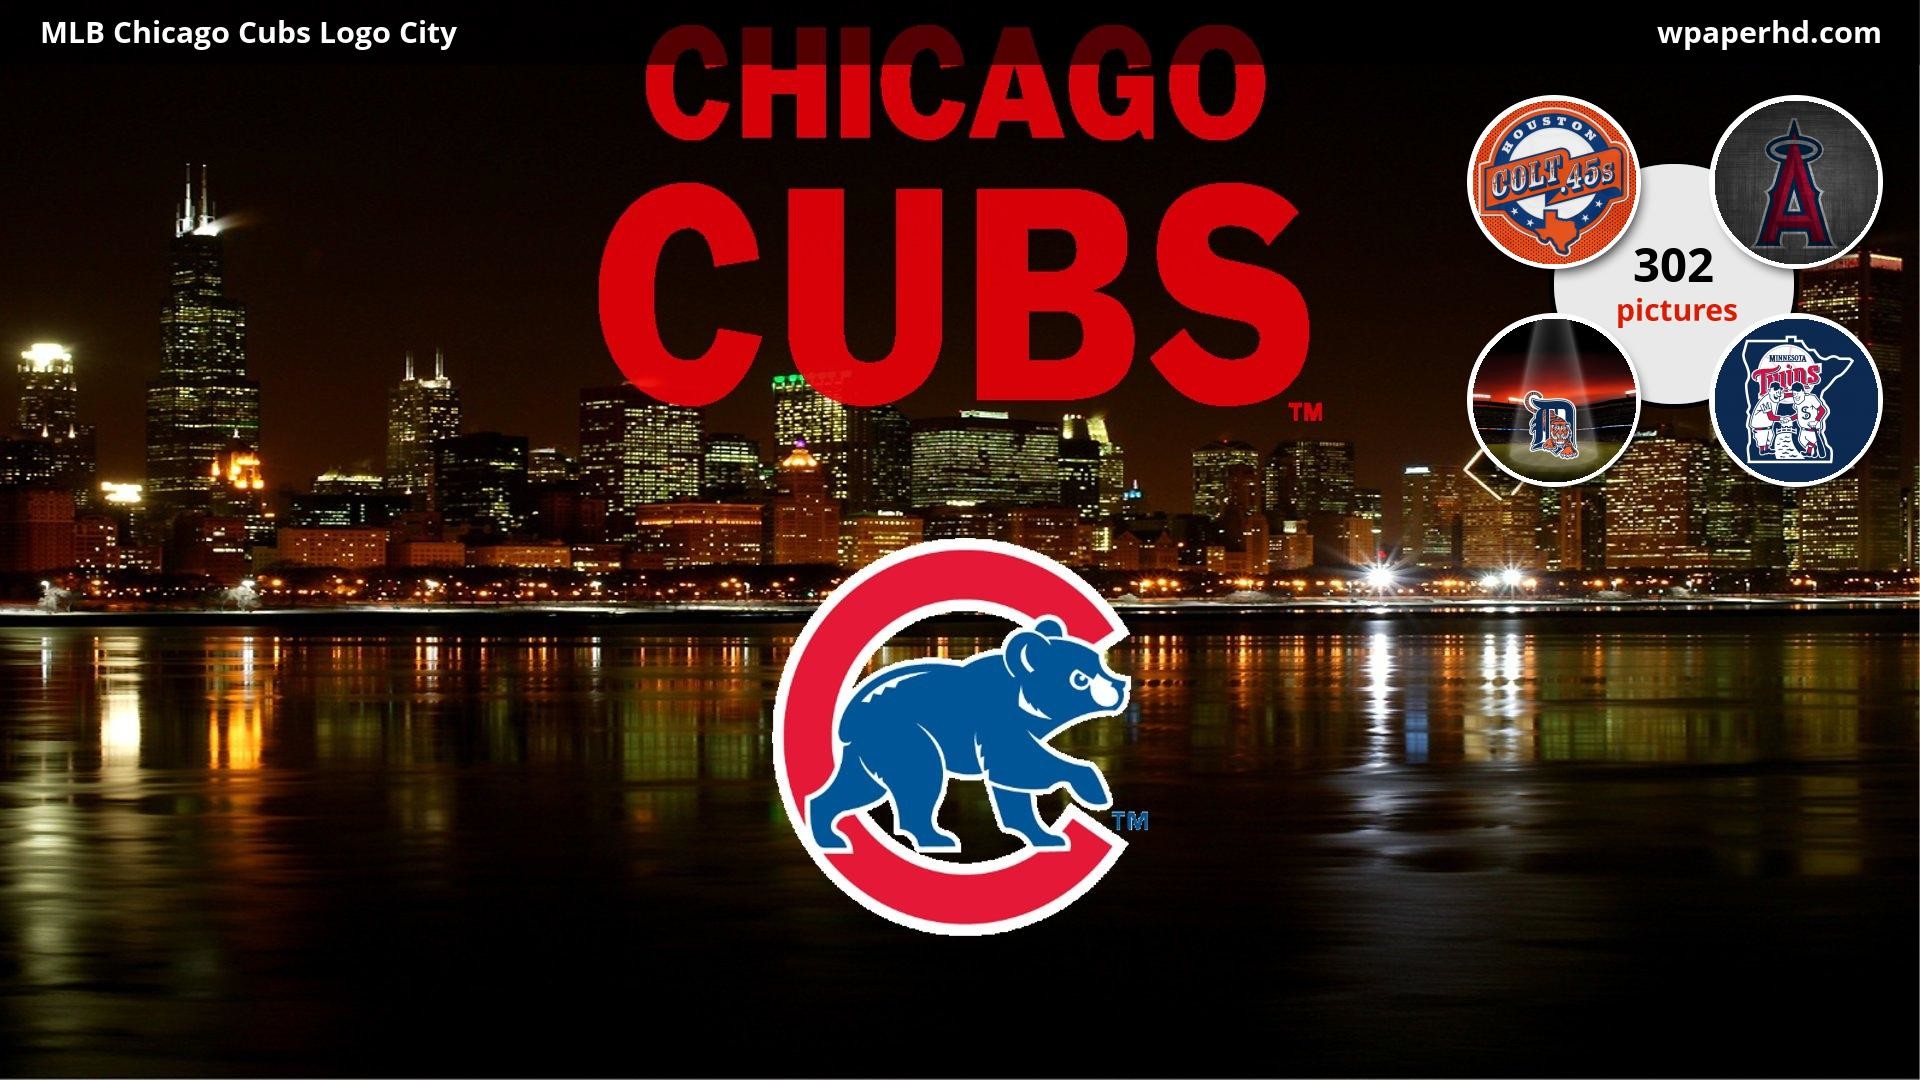 1920x1080 ... Chicago Cubs Logo City wallpaper, where you can download this picture  in Original size and ...